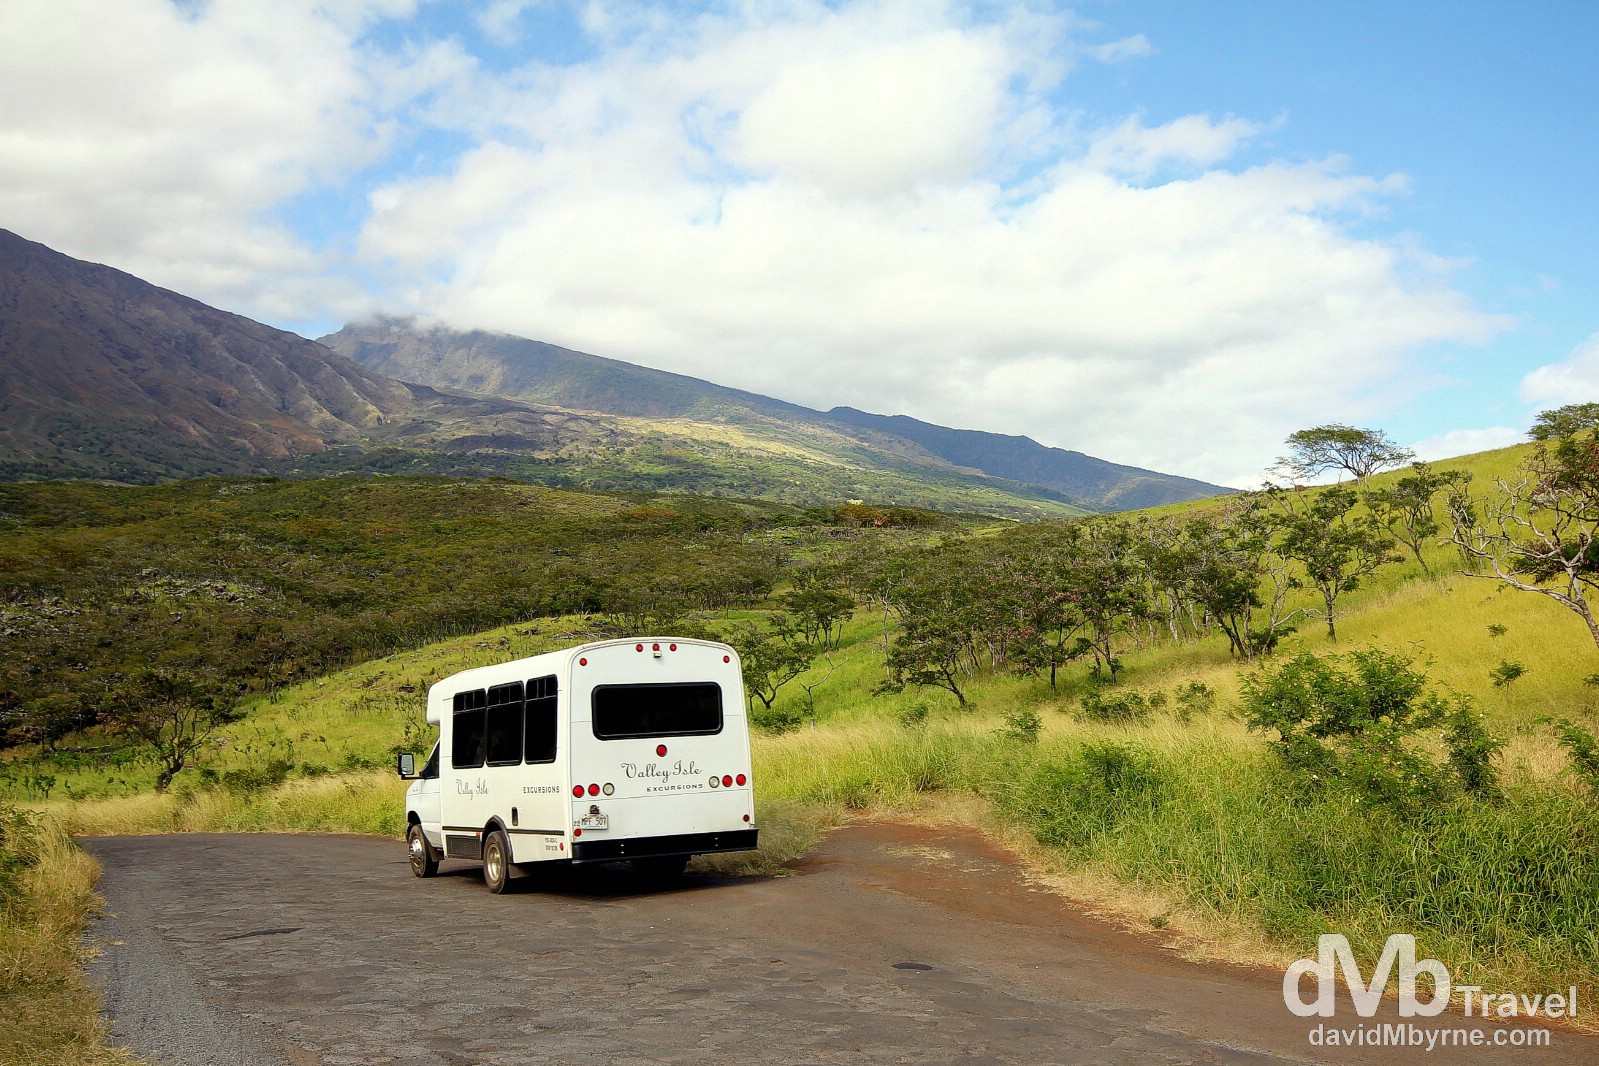 A Valley Isle Excursions van on a section of the 'Road To Hana' tour on the Piilani Highway/Kalama Park Road in southern Maui, Hawaii, USA. March 7th 2103.